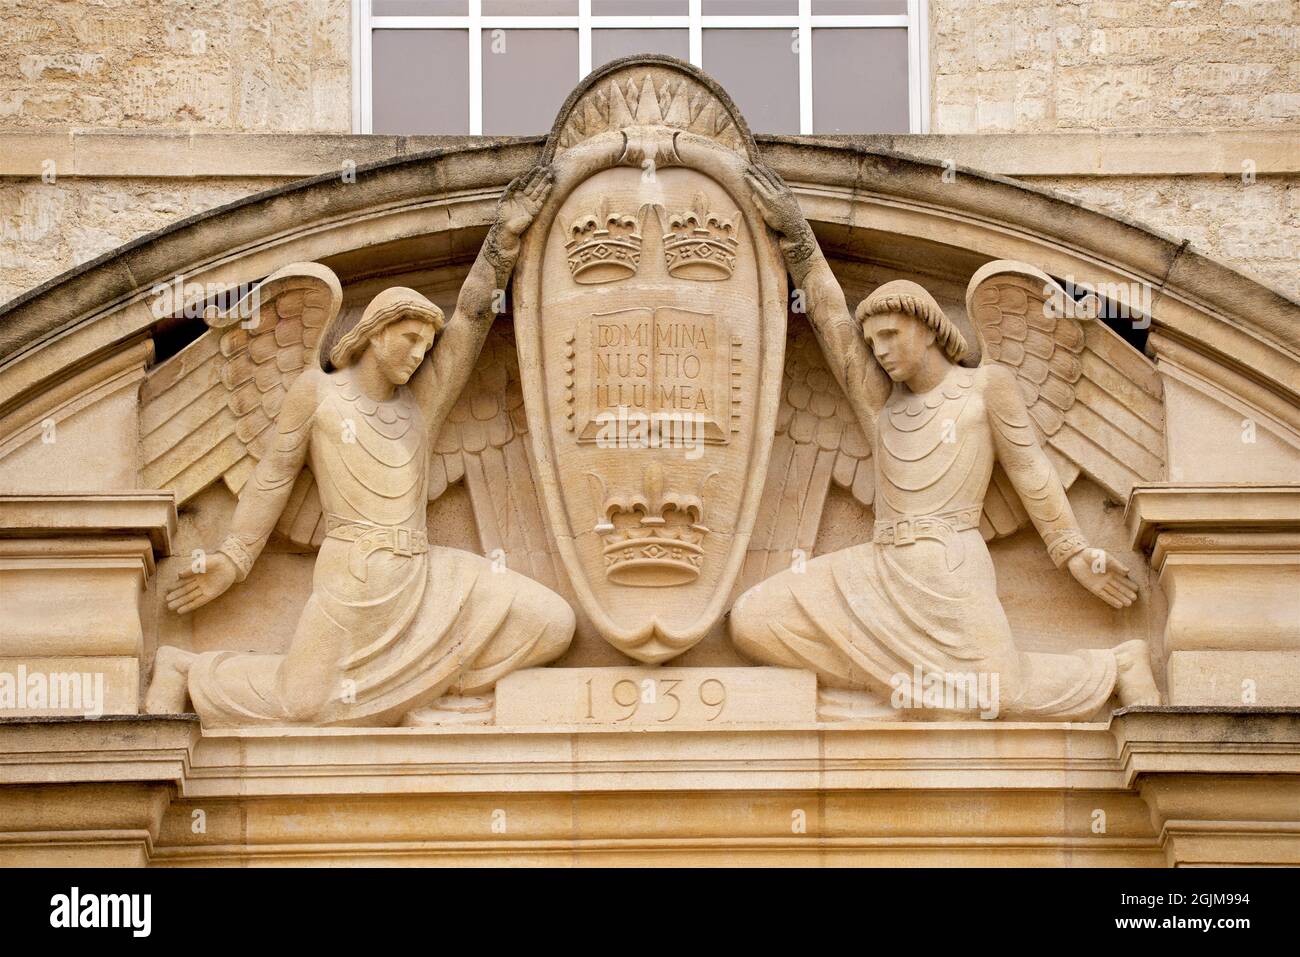 Stone carved decoration on exterior of the University Building,the Weston Library, University of Oxford, Oxford, England, UK. Dated 1939  OMINUS ILLUMINATIO MEA. University motto, the Lord is my light Stock Photo